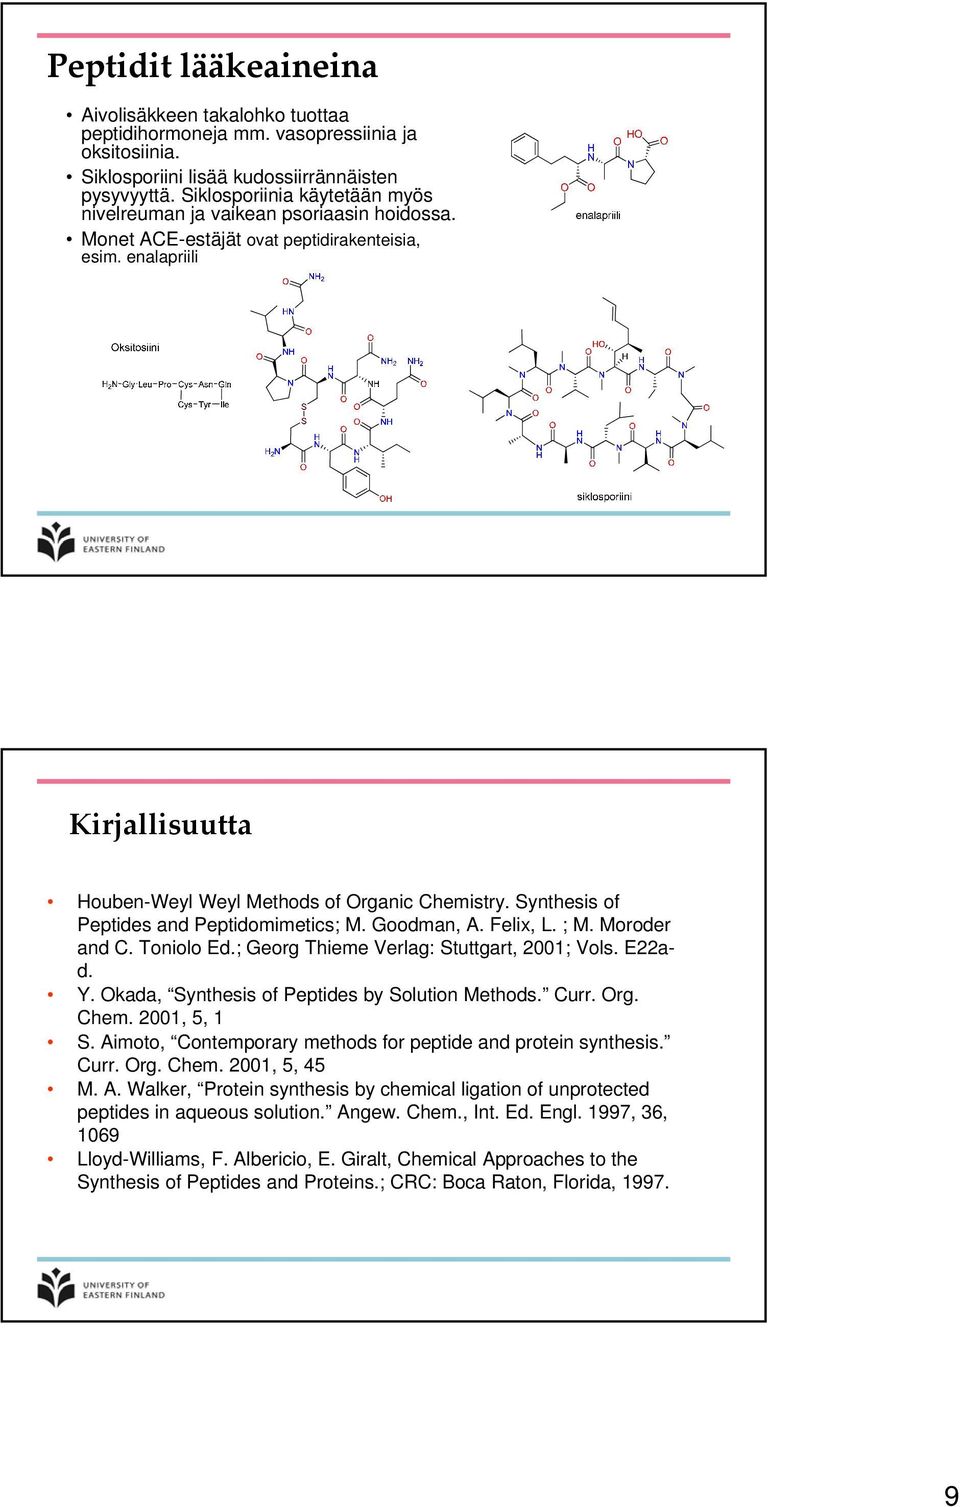 Synthesis of eptides and eptidomimetics; M. Goodman, A. Felix, L. ; M. Moroder and C. Toniolo Ed.; Georg Thieme Verlag: Stuttgart, 2001; Vols. E22ad. Y. kada, Synthesis of eptides by Solution Methods.